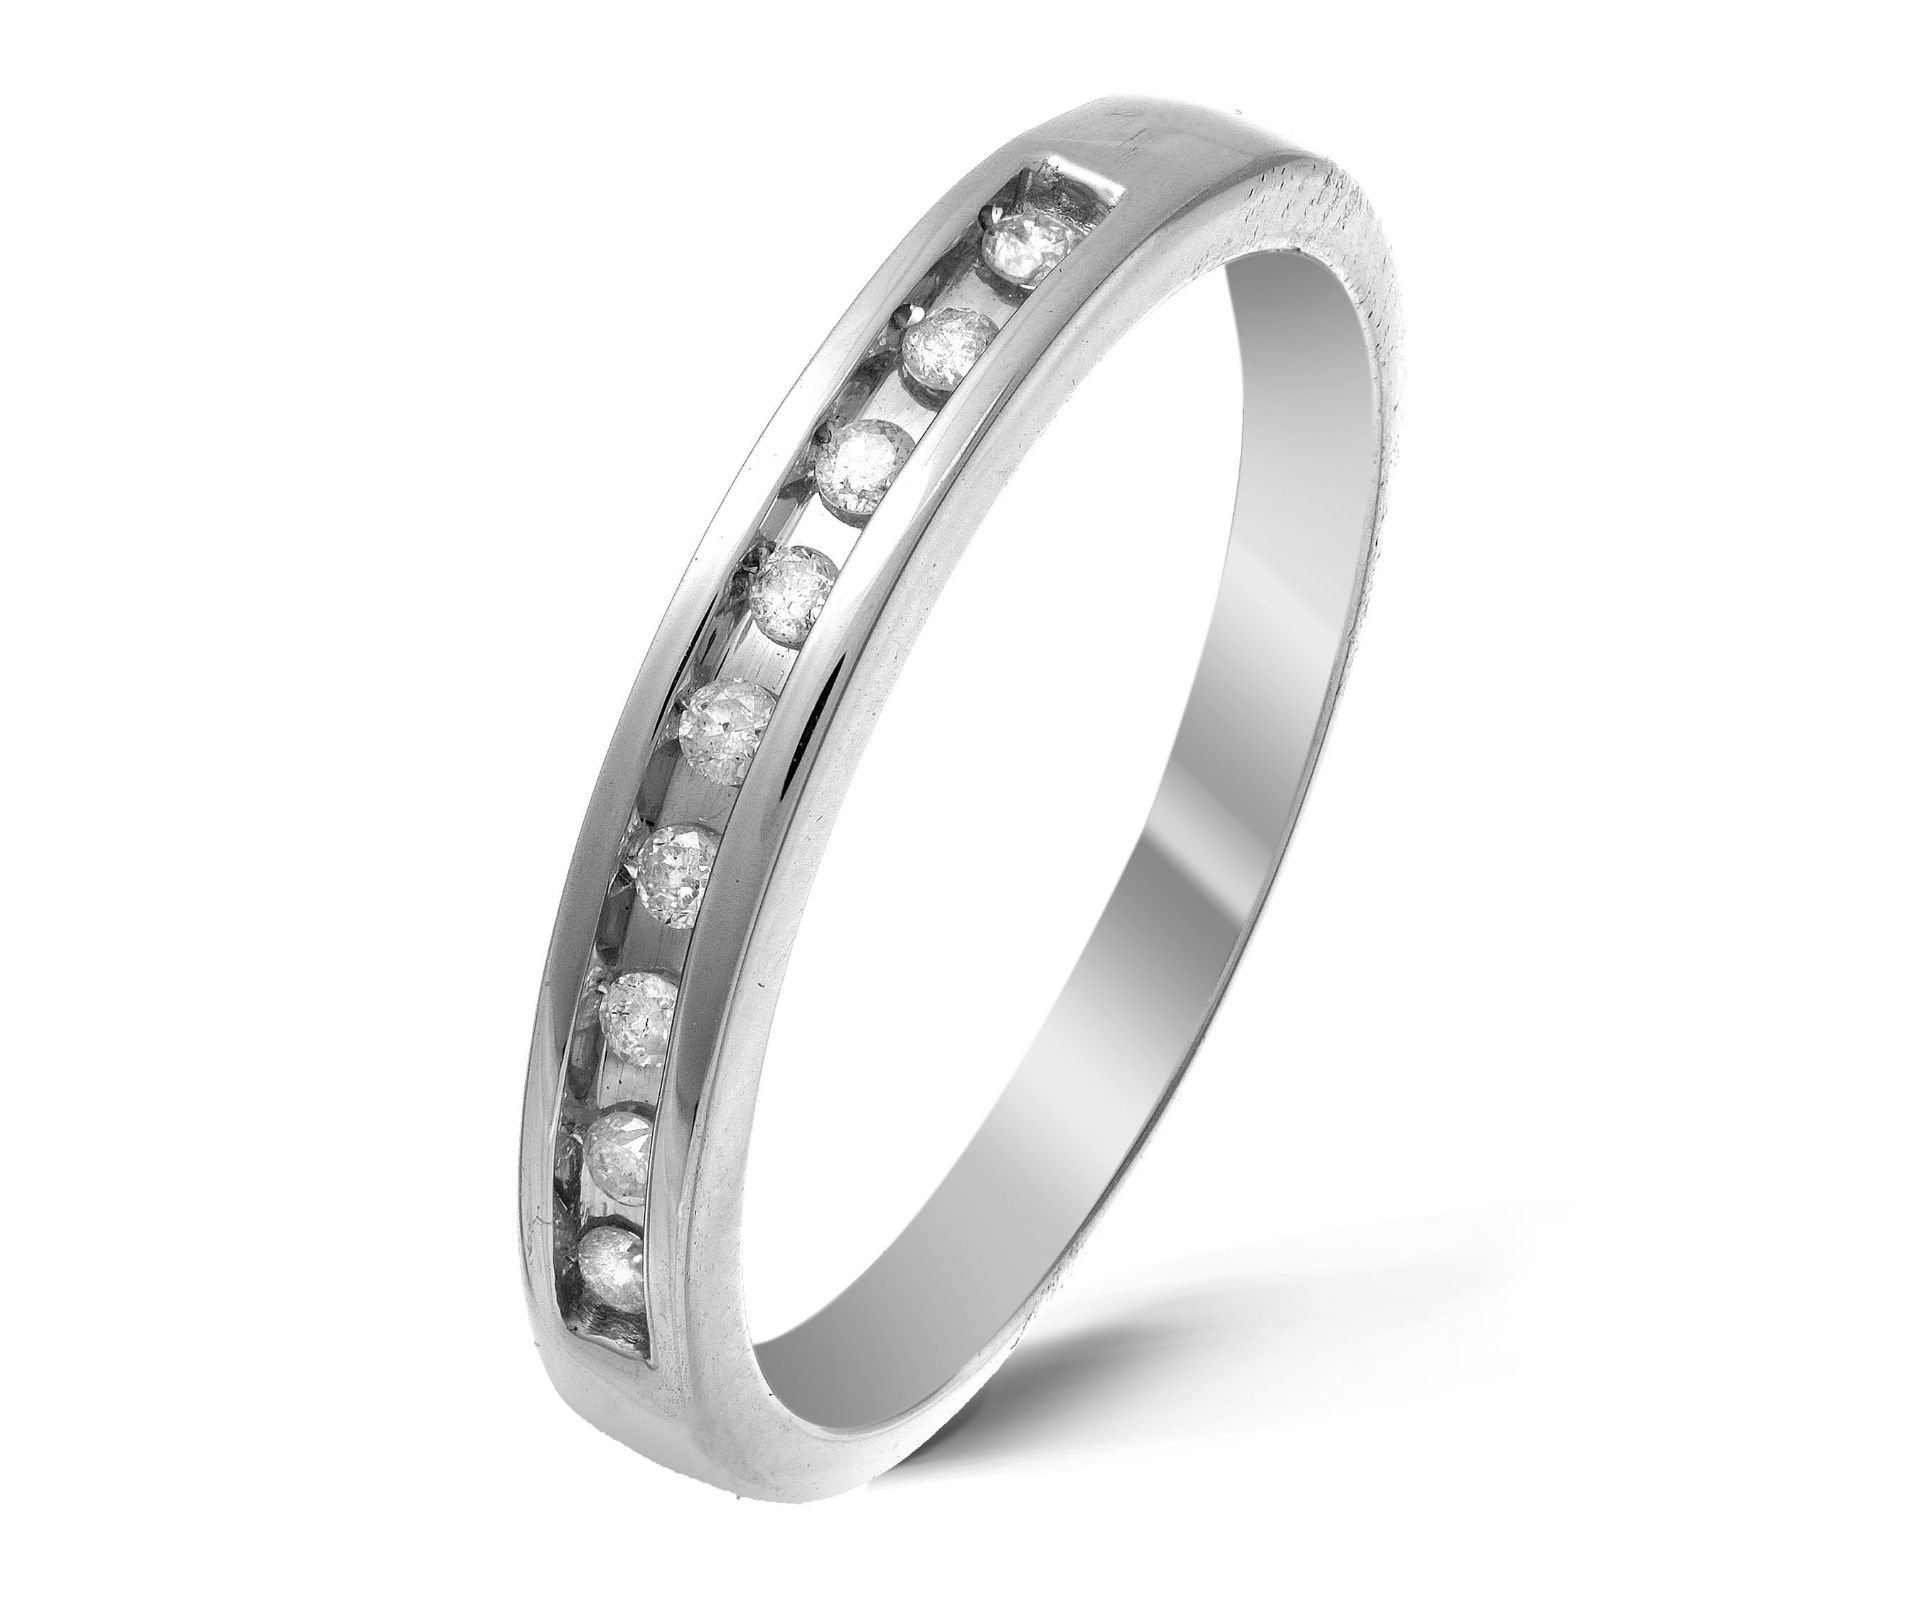 White Gold Channel Set Eternity Ring With 1/10cttw Diamonds Size J RRP £439 (URFX0787W)